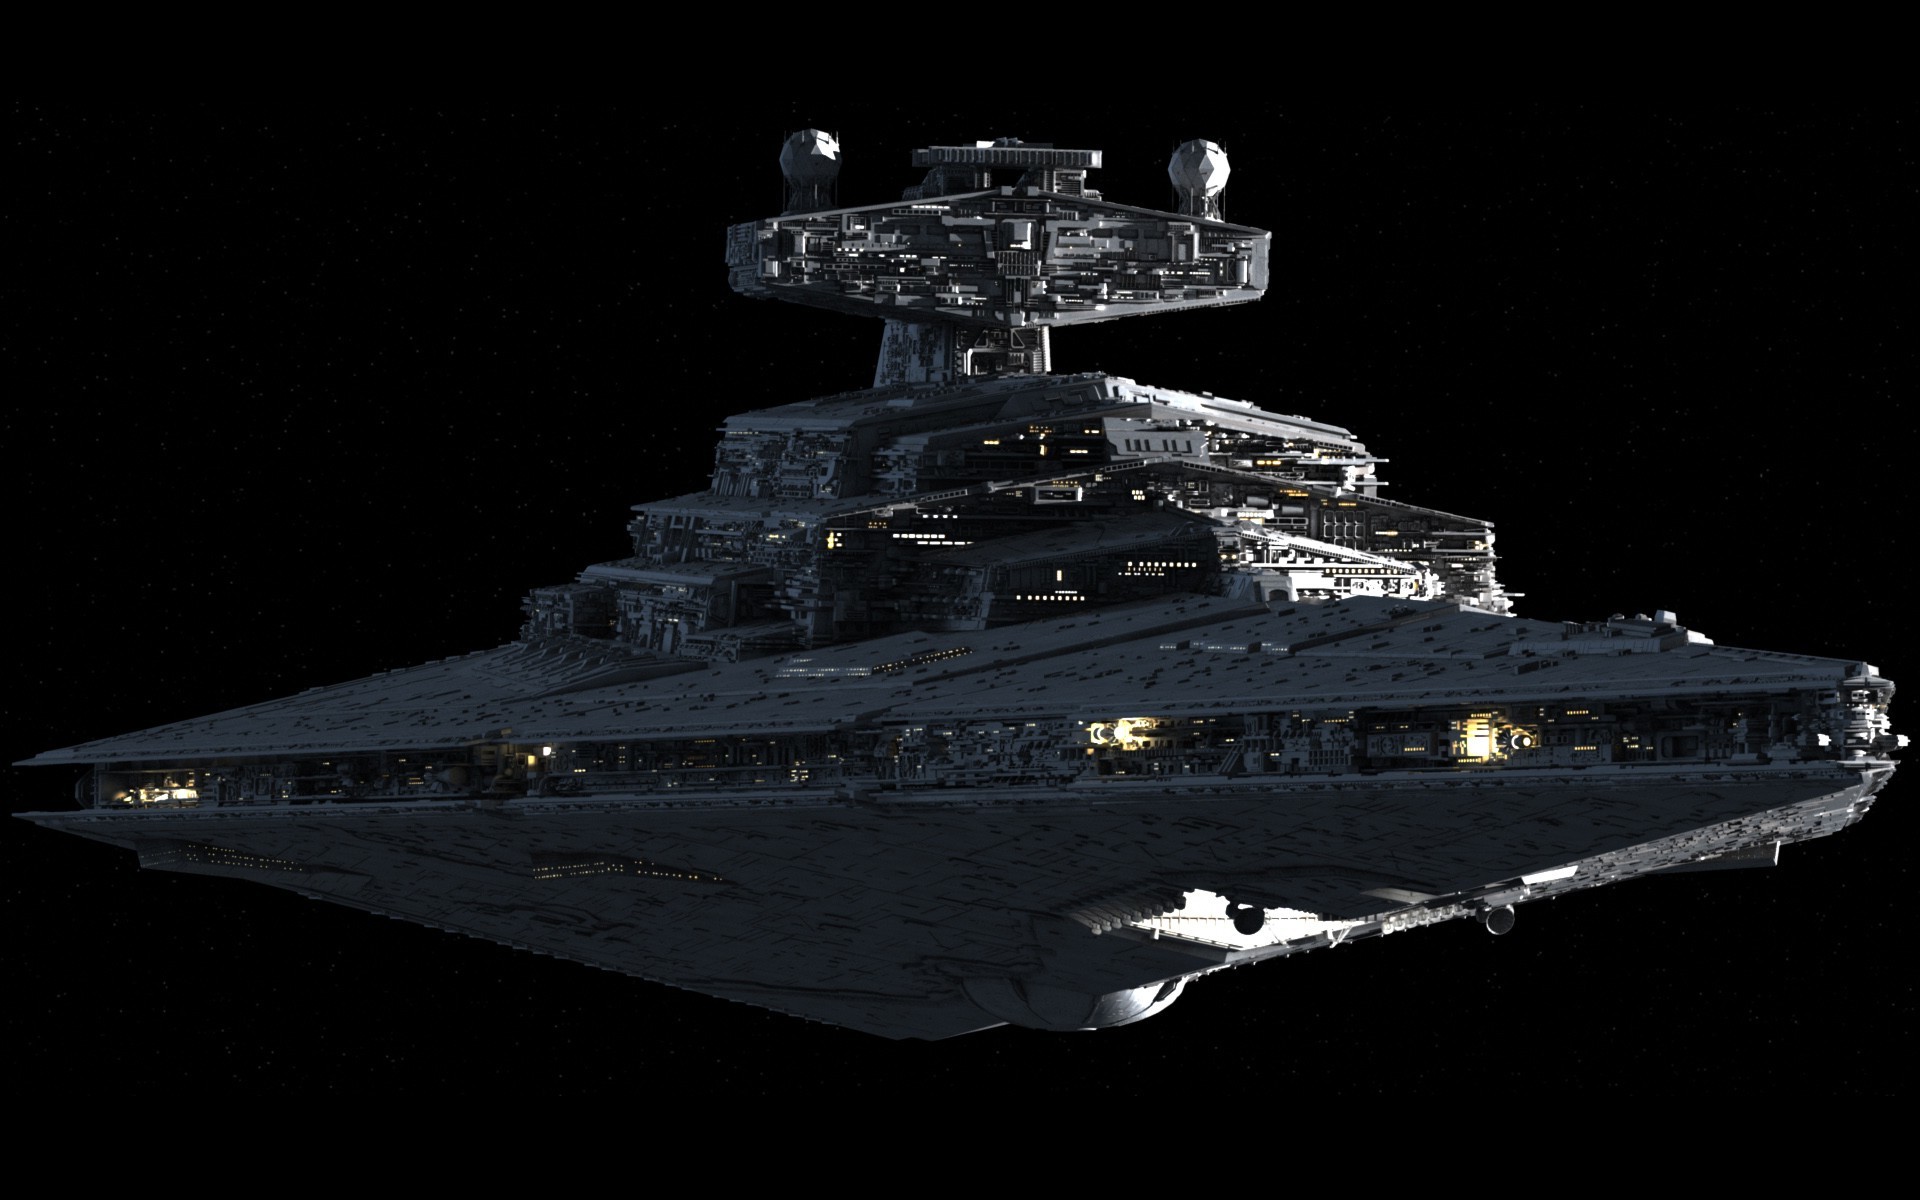 I made a wallpaper of the downed Star Destroyer – Imgur